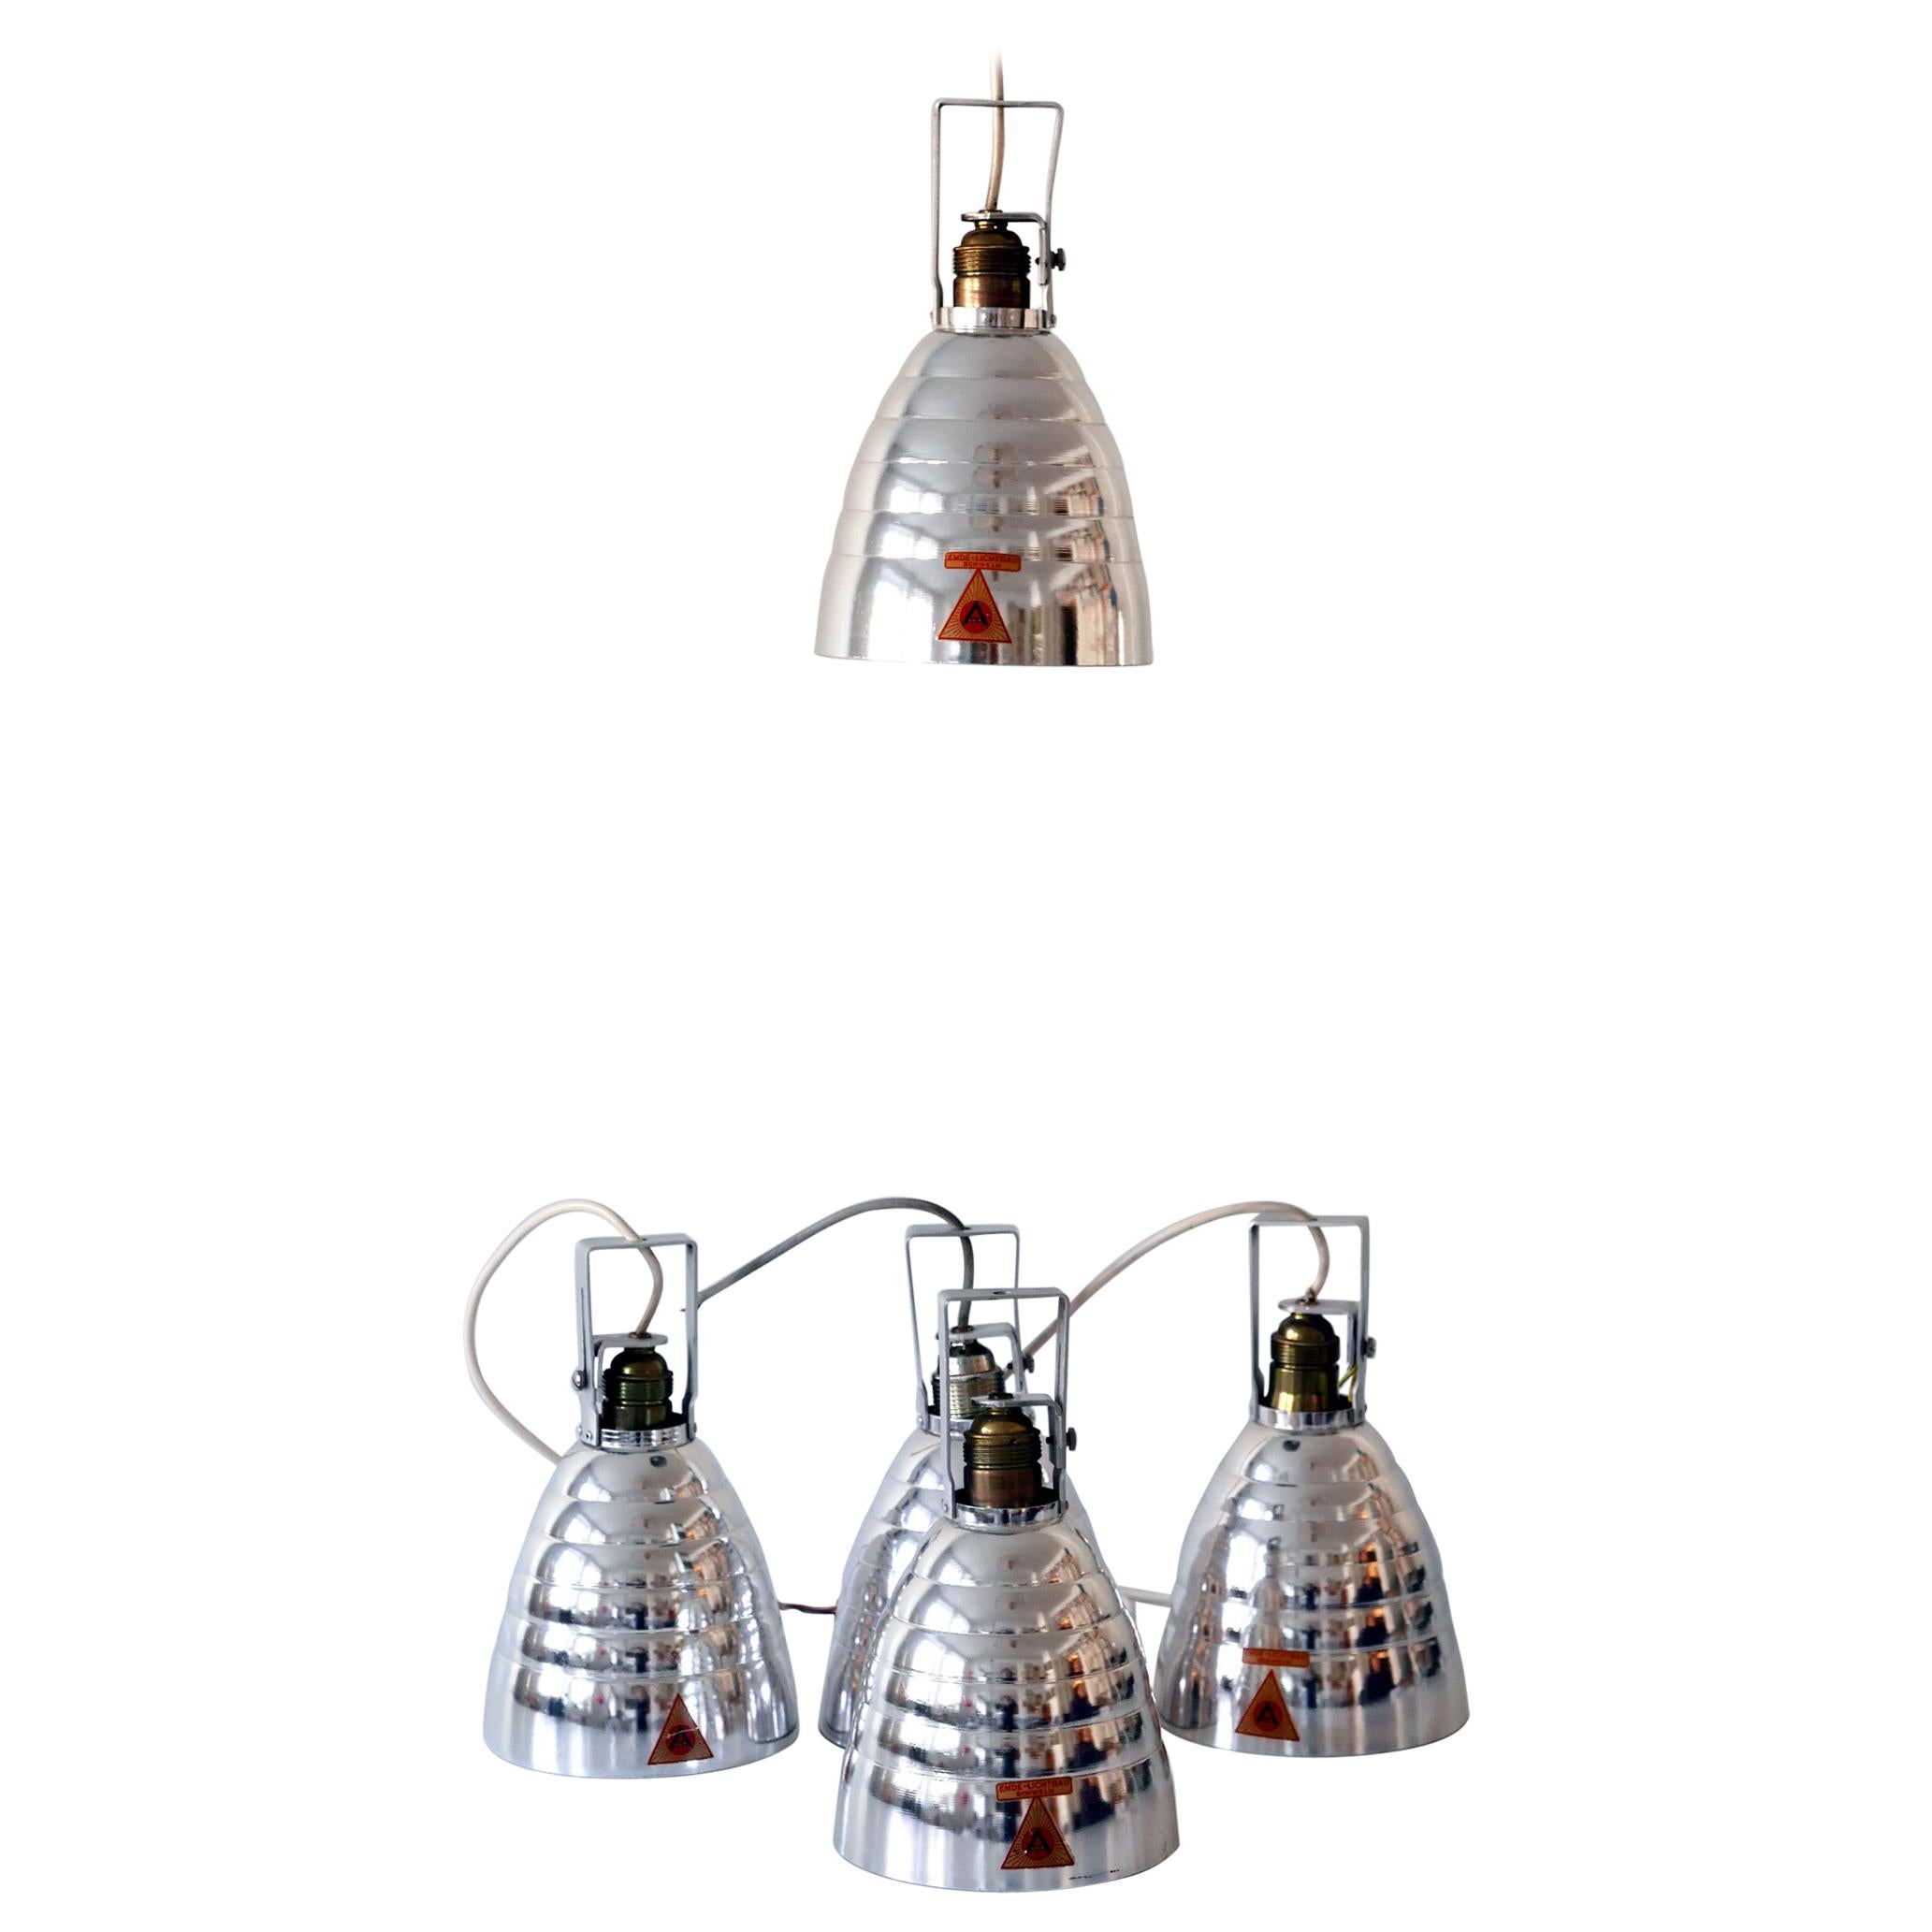 Mid-Century Modern Glossy Ceiling Spot Lights or Pendant Lamps by Alux, Germany